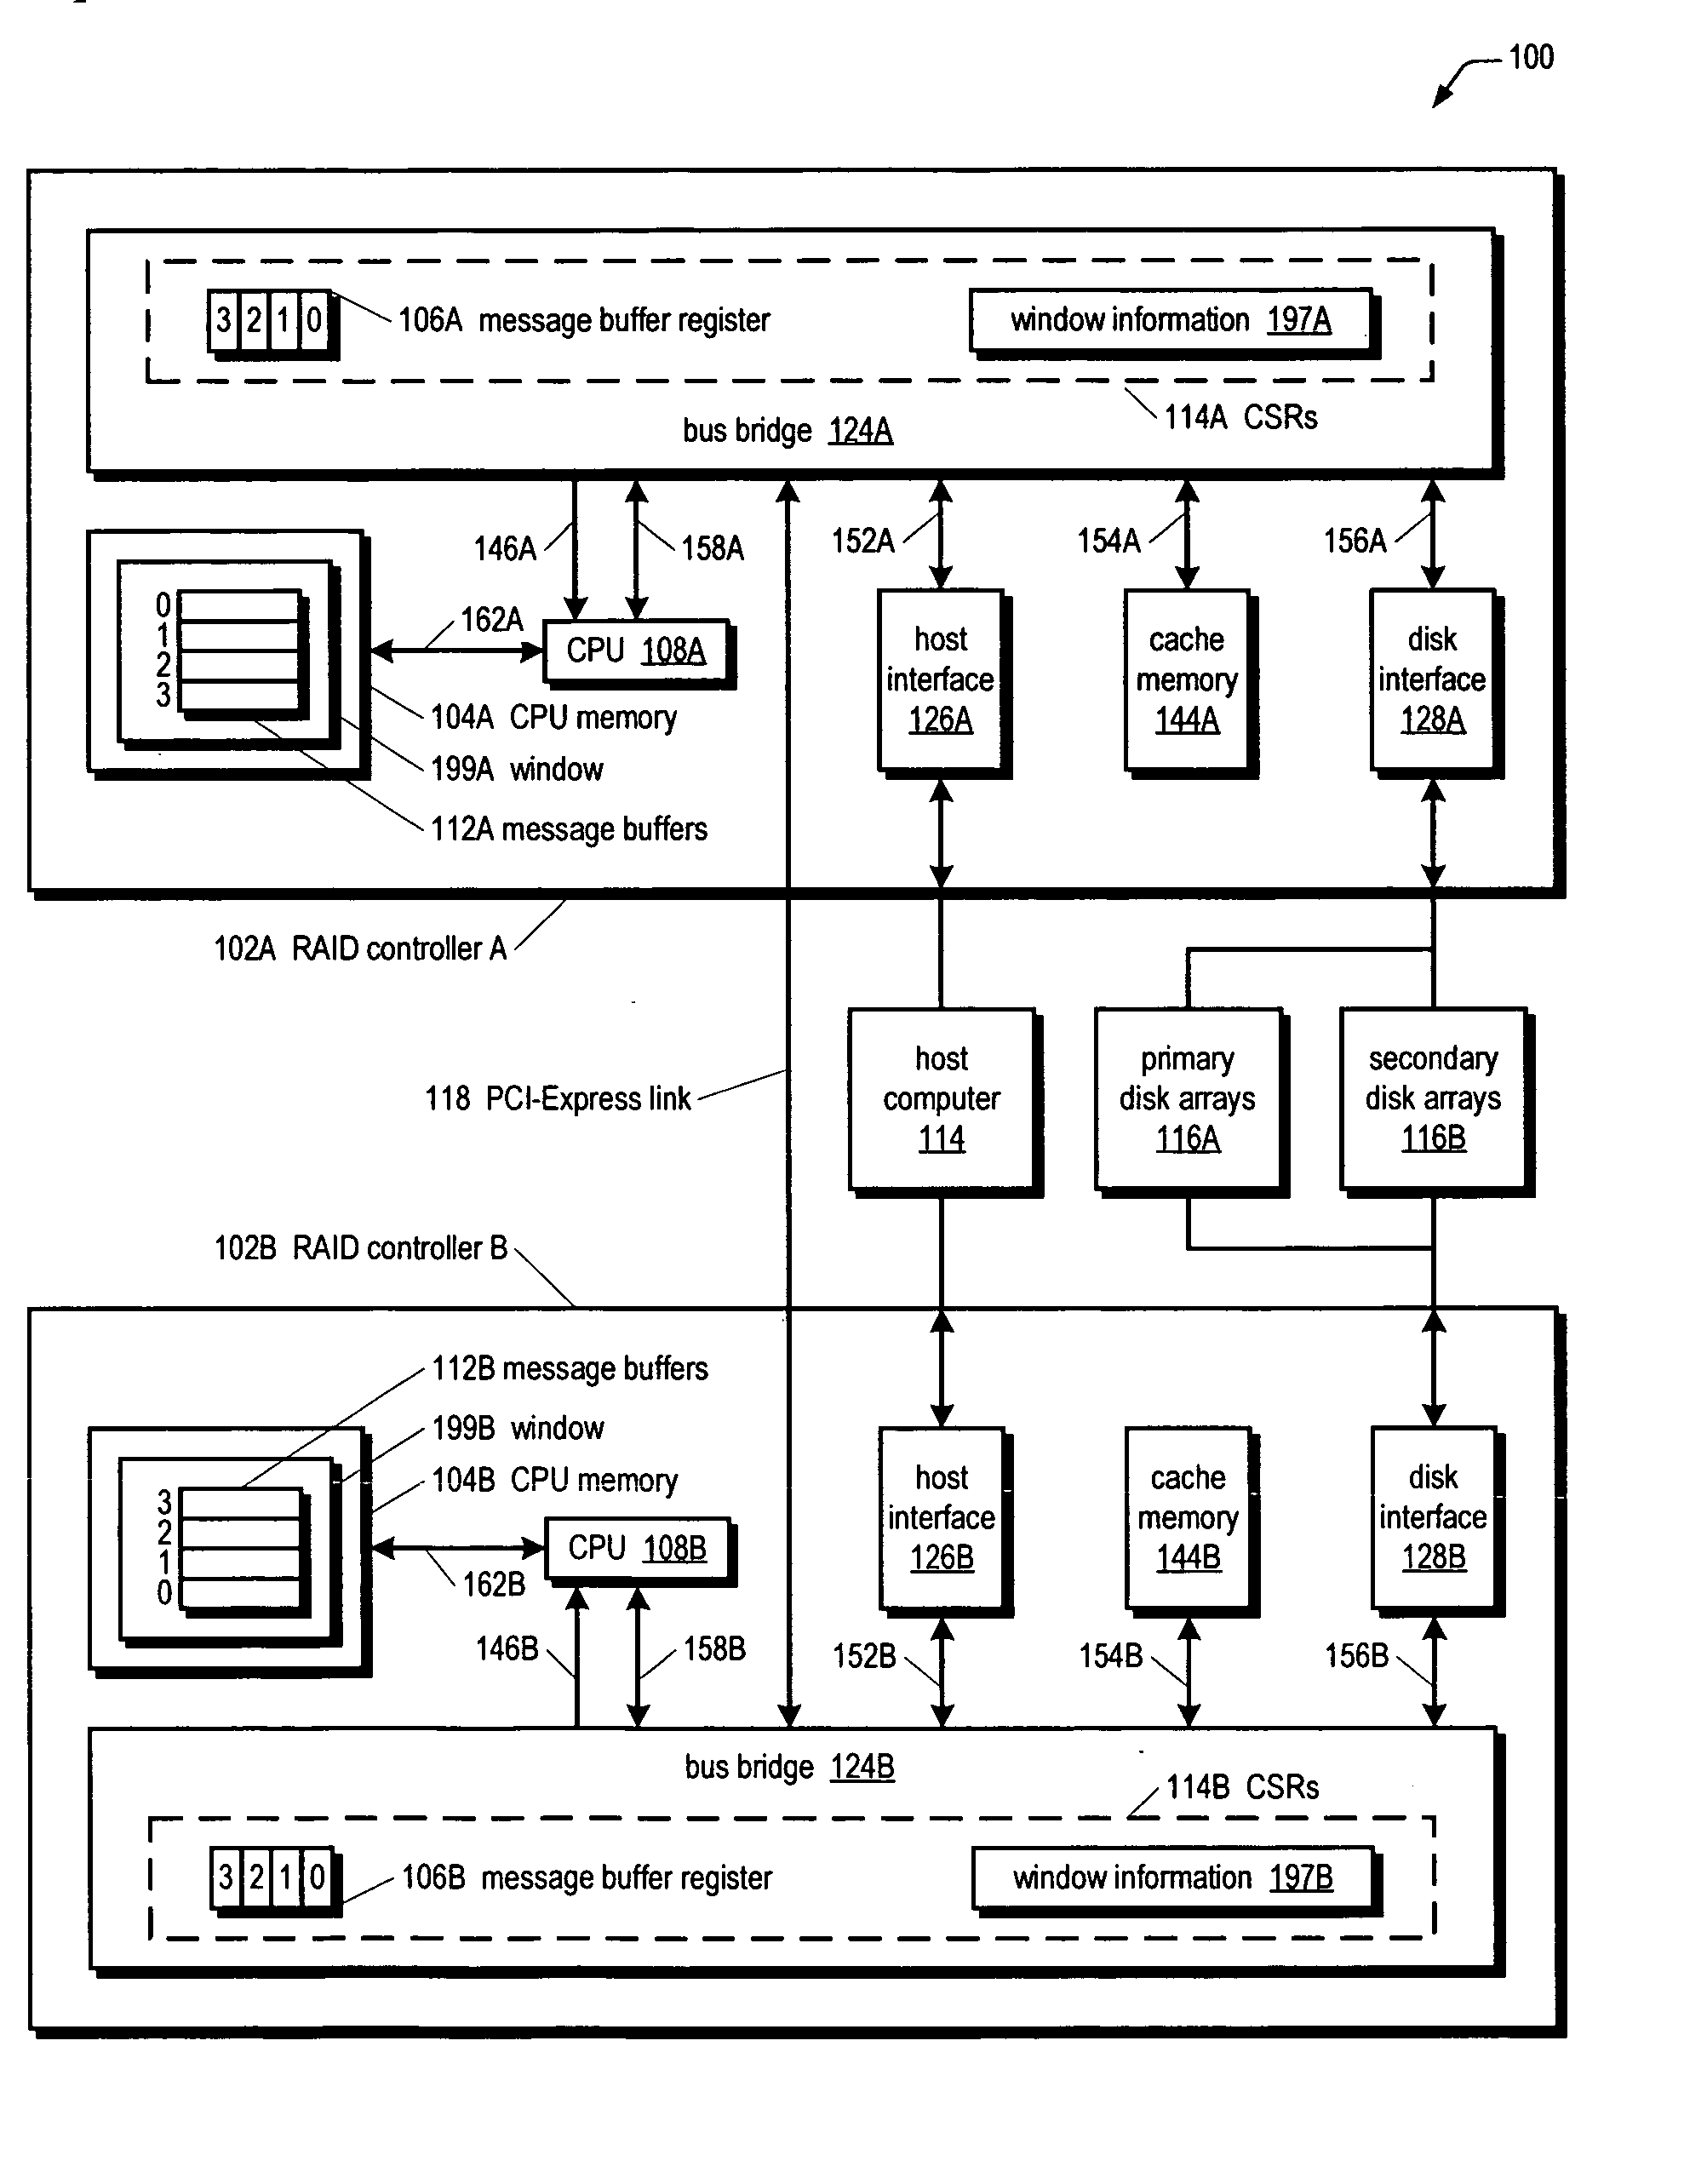 Safe message transfers on PCI-Express link from RAID controller to receiver-programmable window of partner RAID controller CPU memory